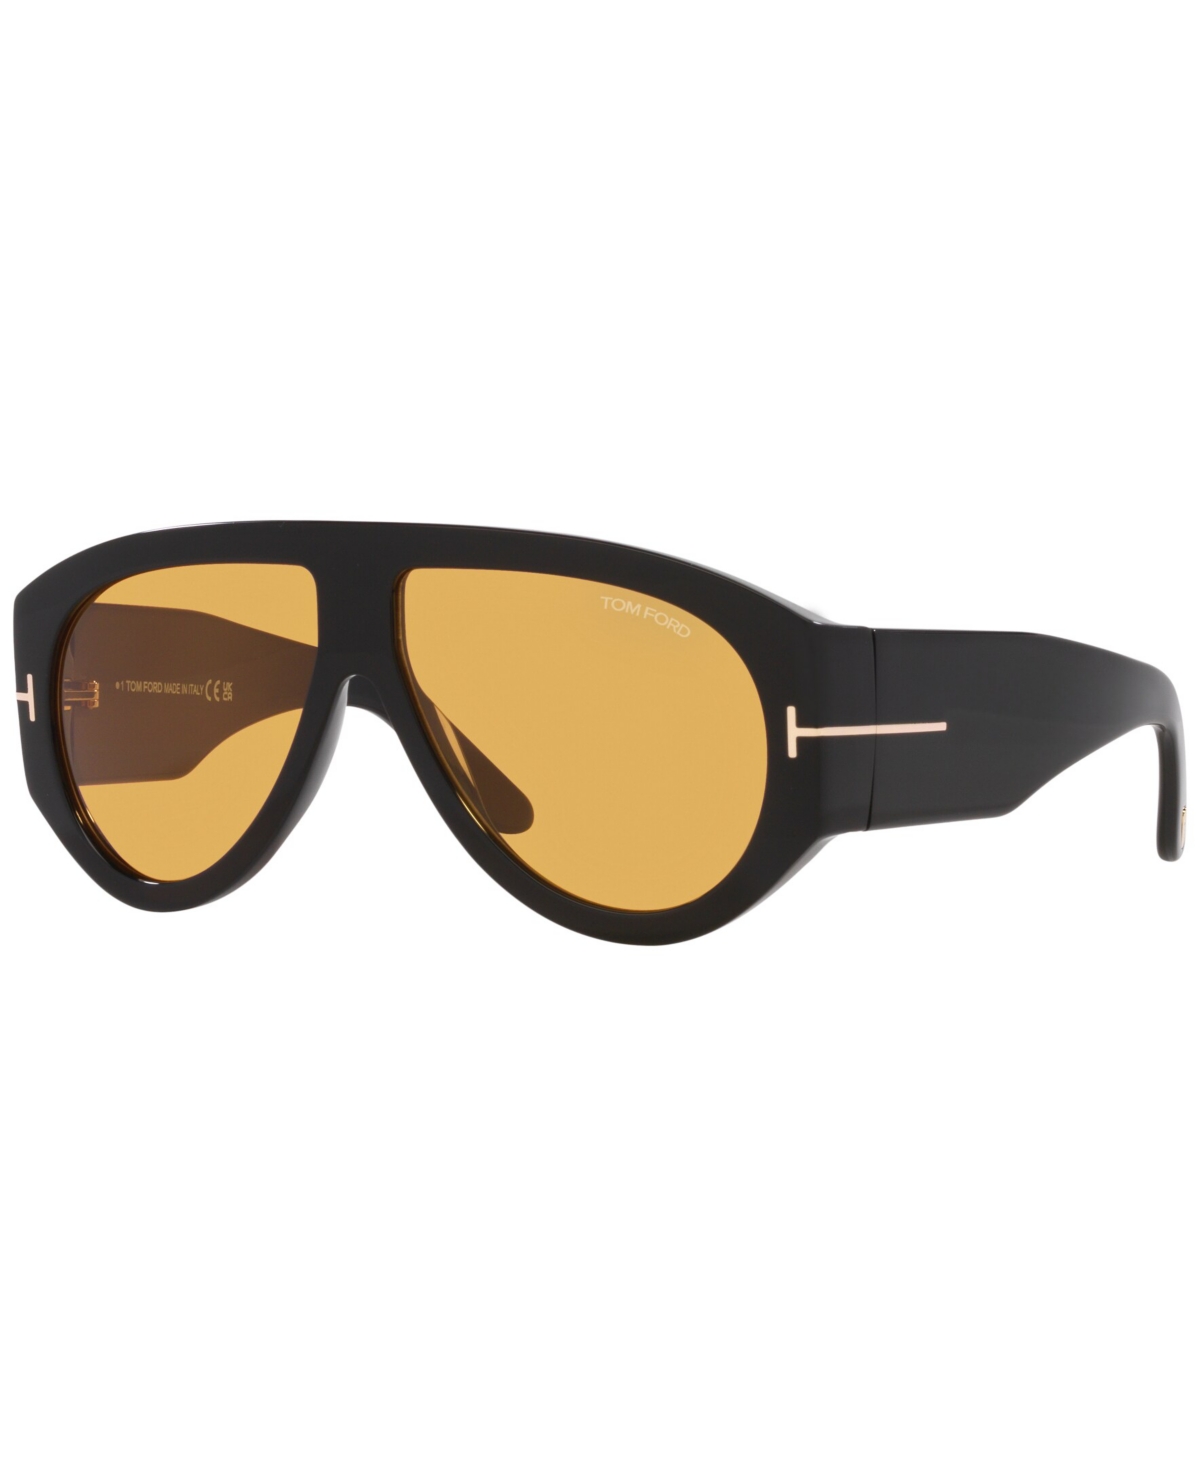 Tom Ford Man Sunglass Ft1044 In Black Shiny